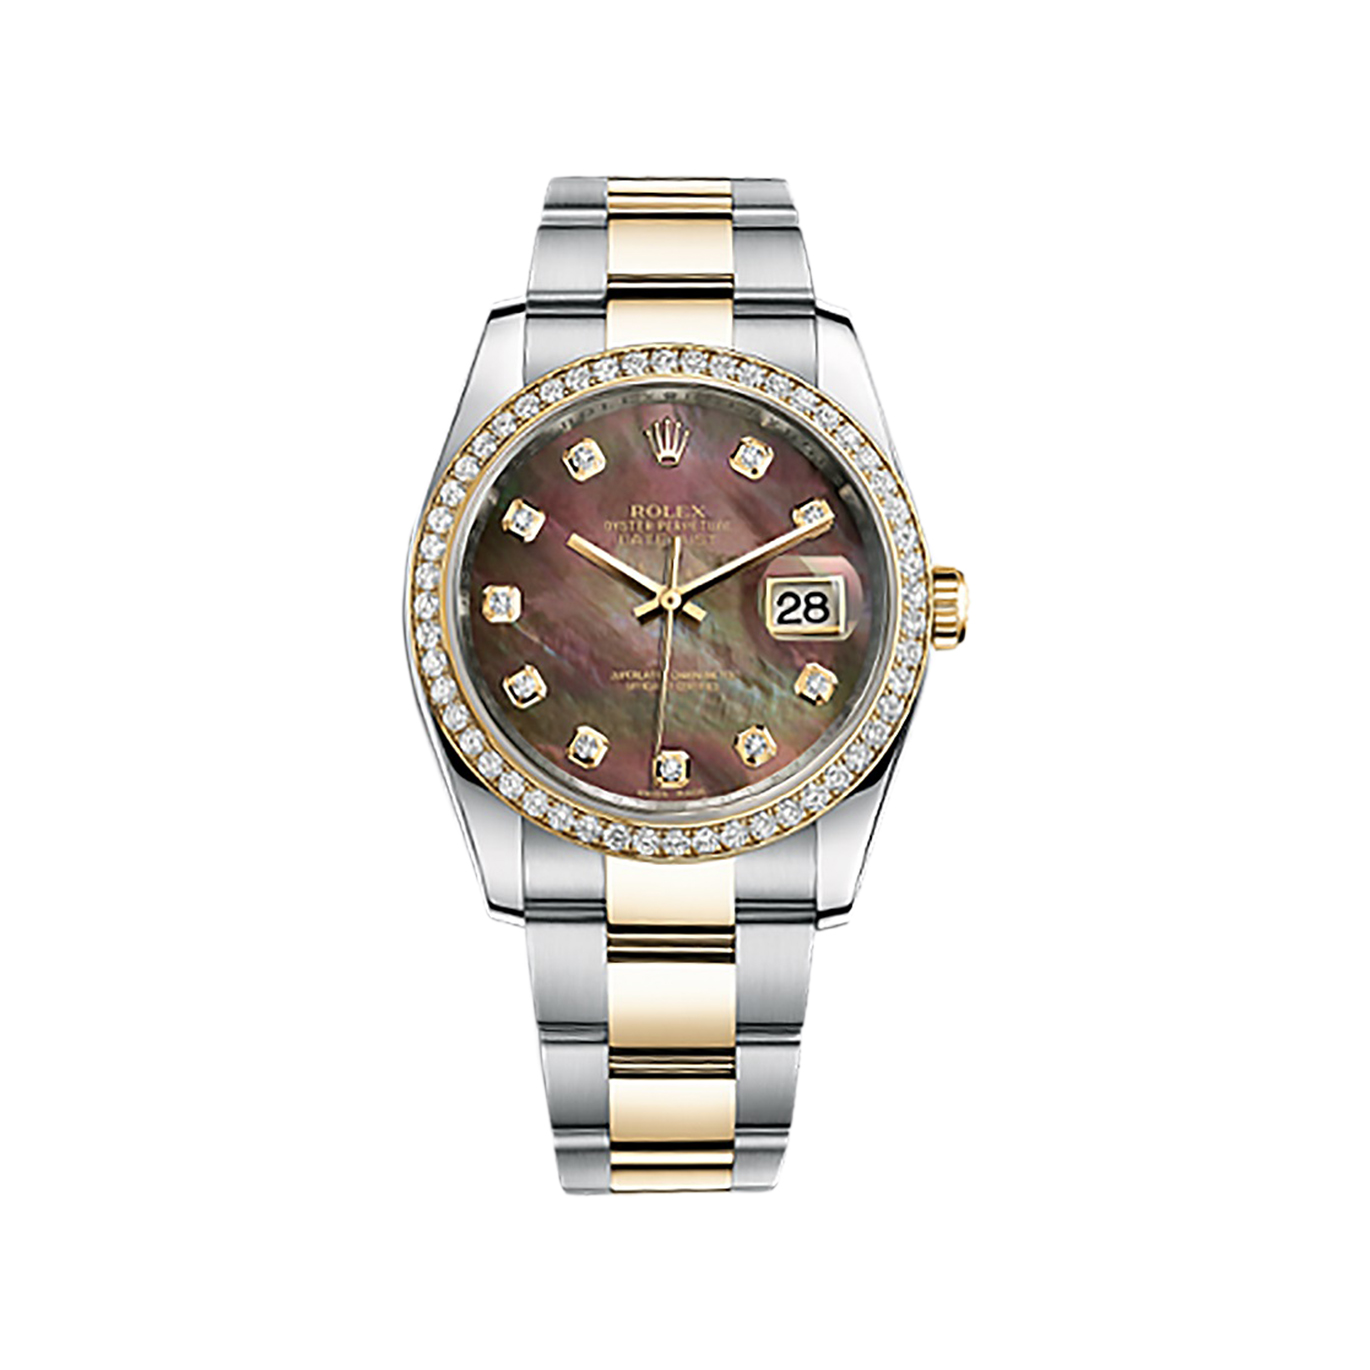 Datejust 36 116243 Gold & Stainless Steel Watch (Black Mother-of-Pearl Set with Diamonds)